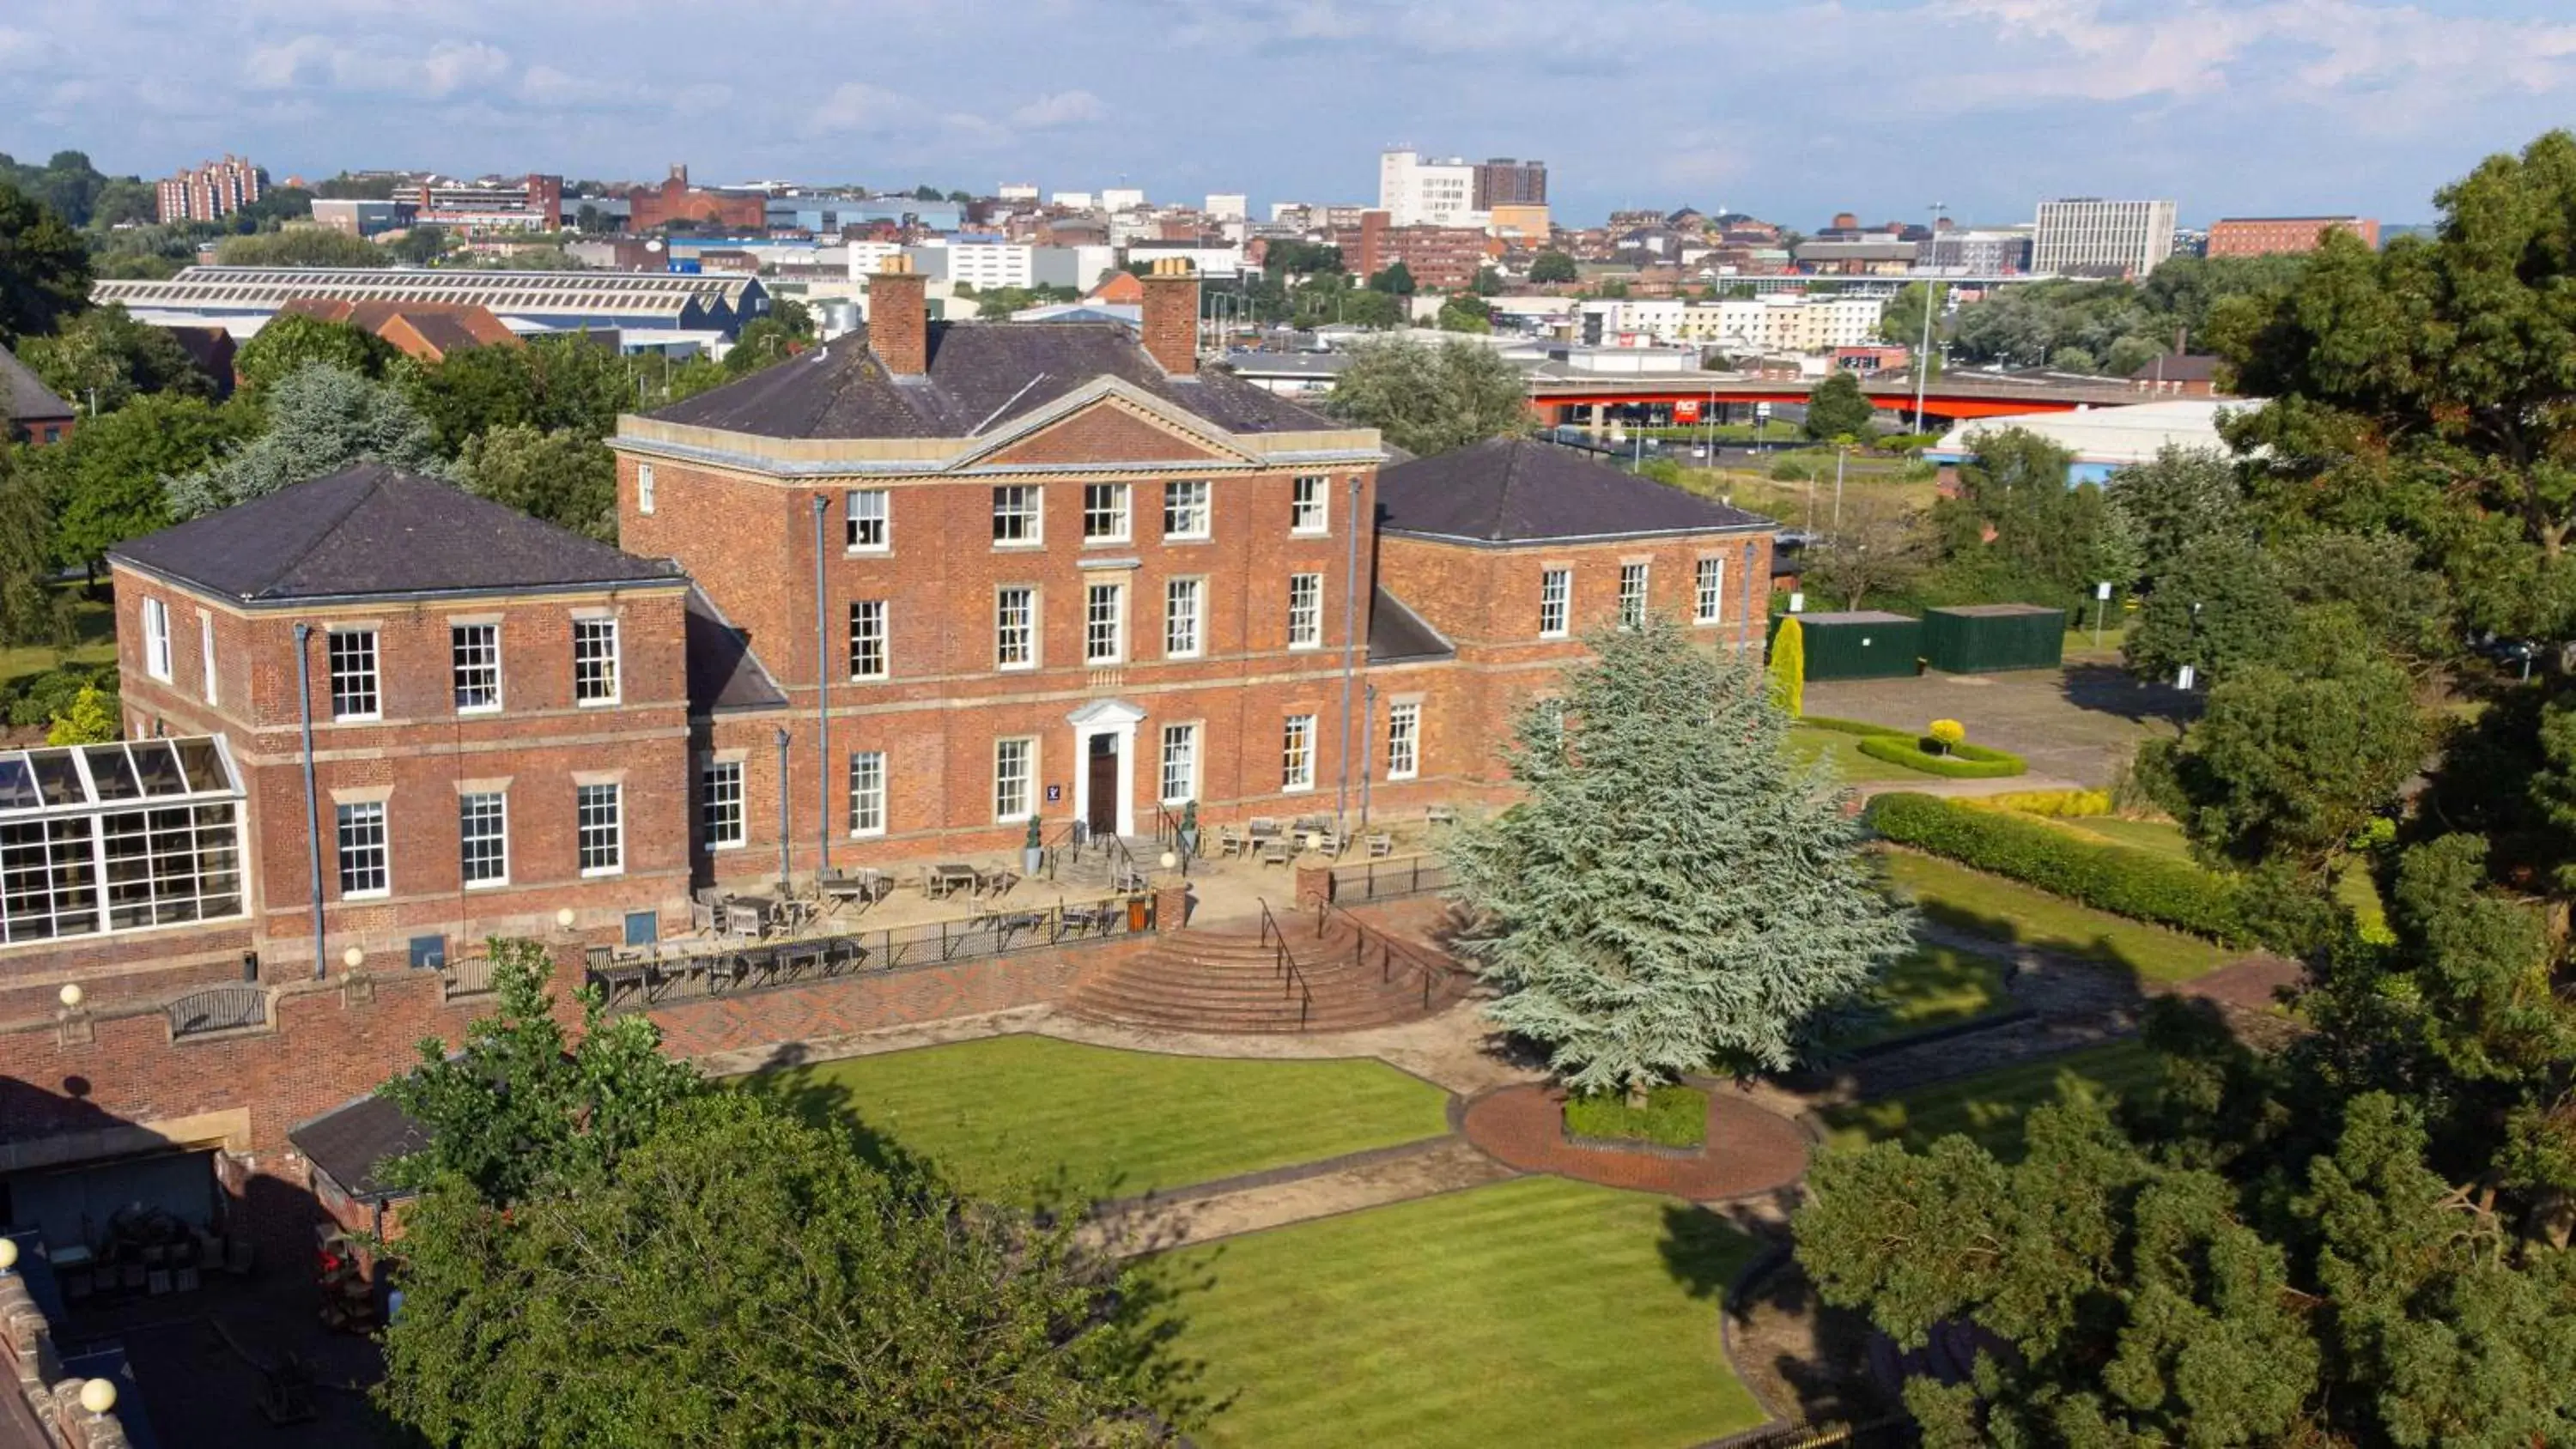 Property building, Bird's-eye View in DoubleTree by Hilton Stoke-on-Trent, United Kingdom